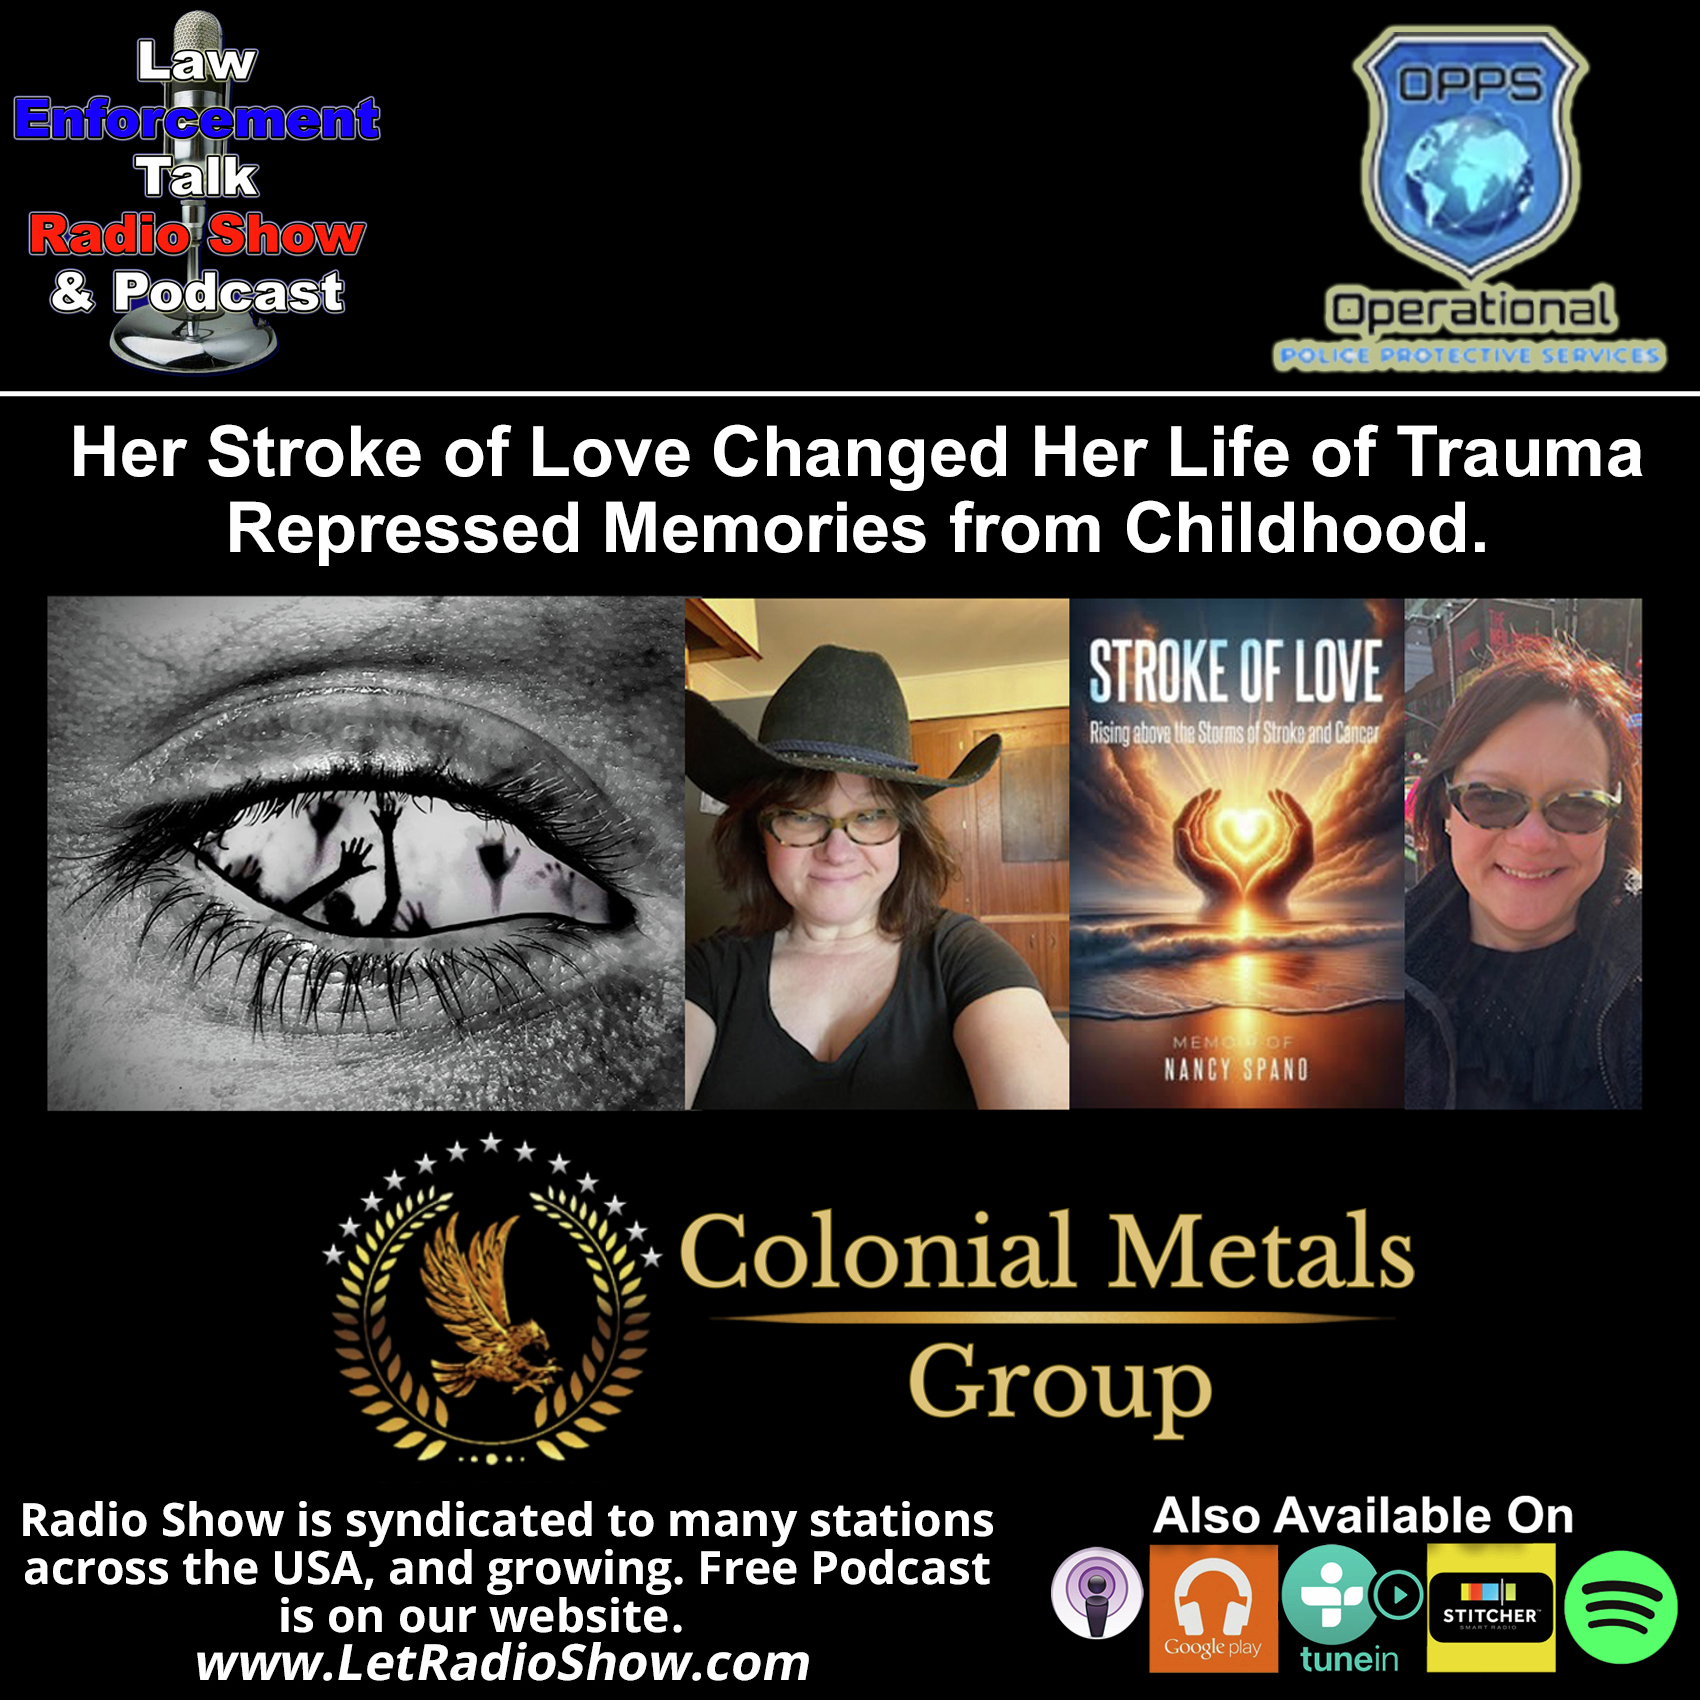 Her Stroke of Love Changed Her Life of Repressed Memories from Childhood Trauma.